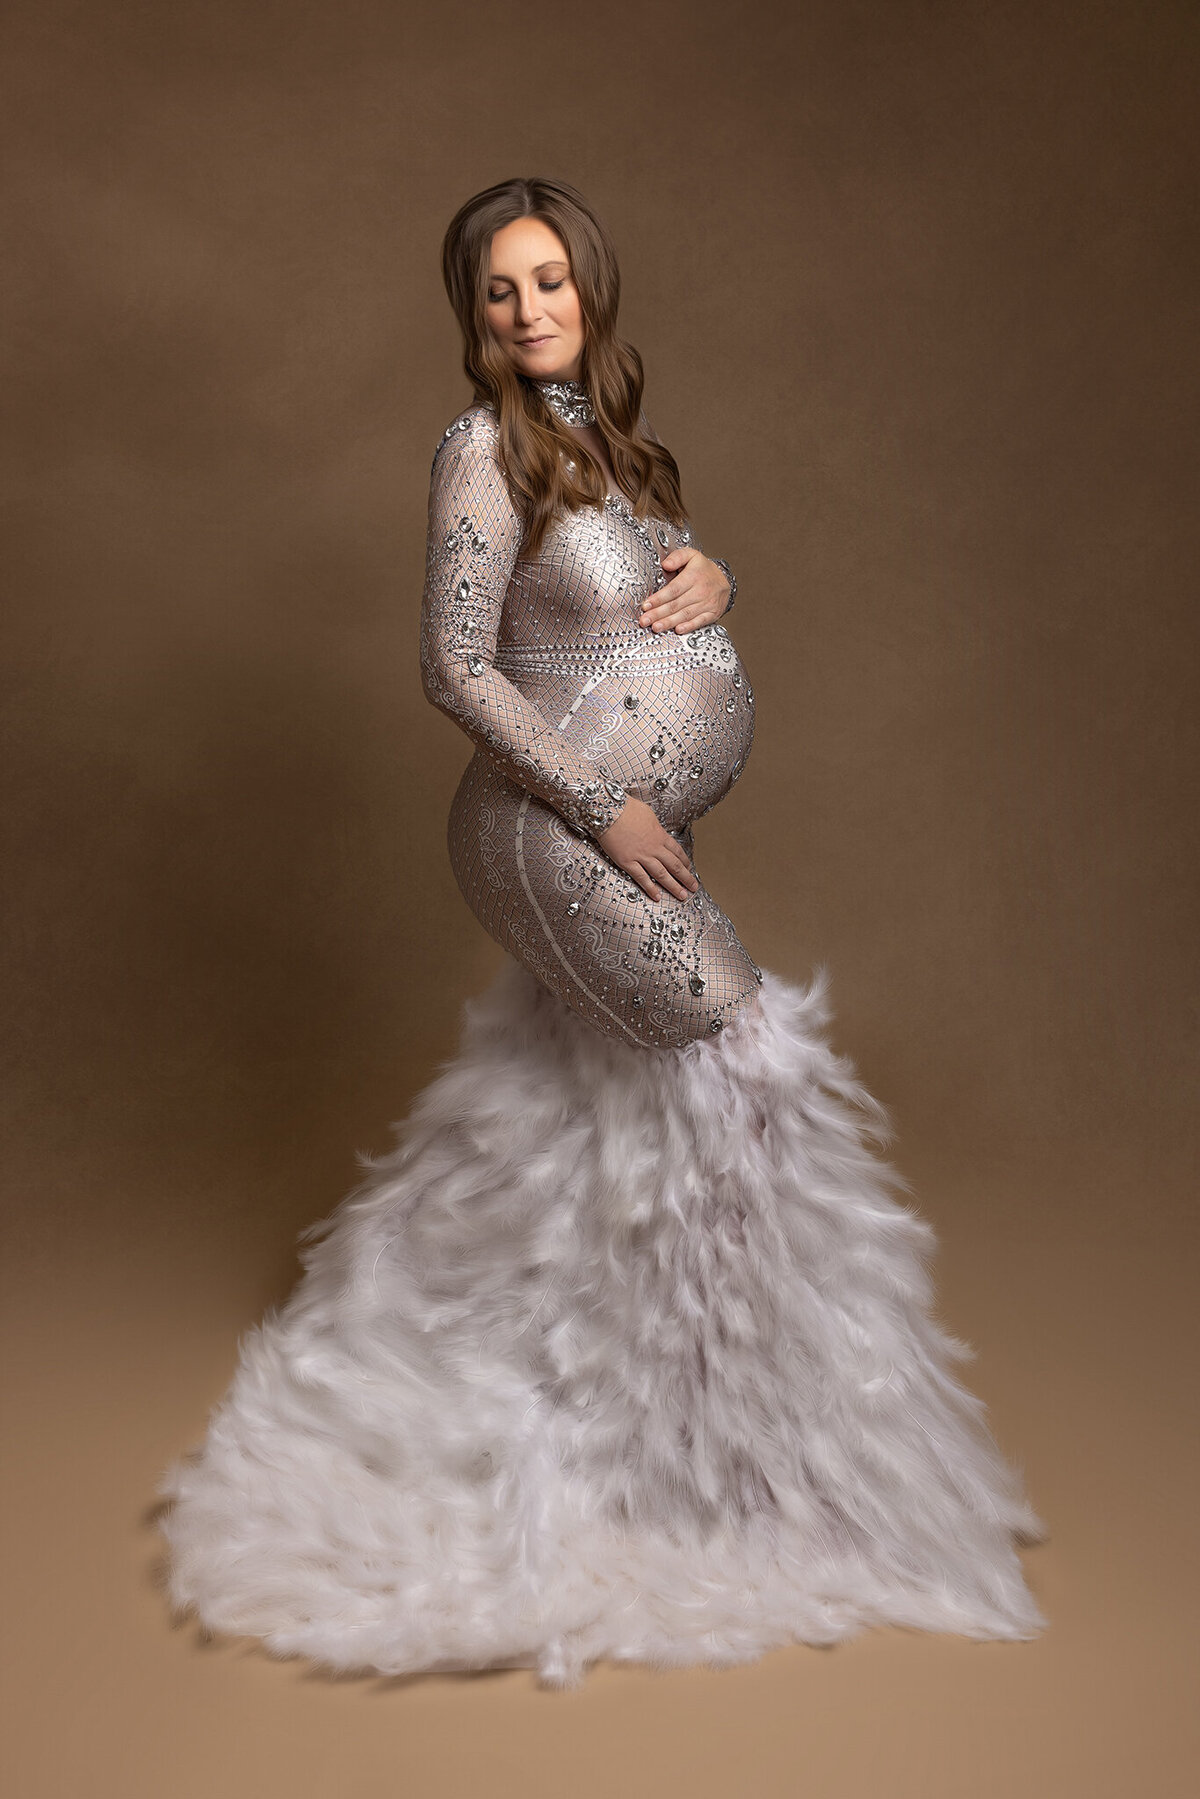 Charleston MAternity Photography with girl in feather dress with jewels